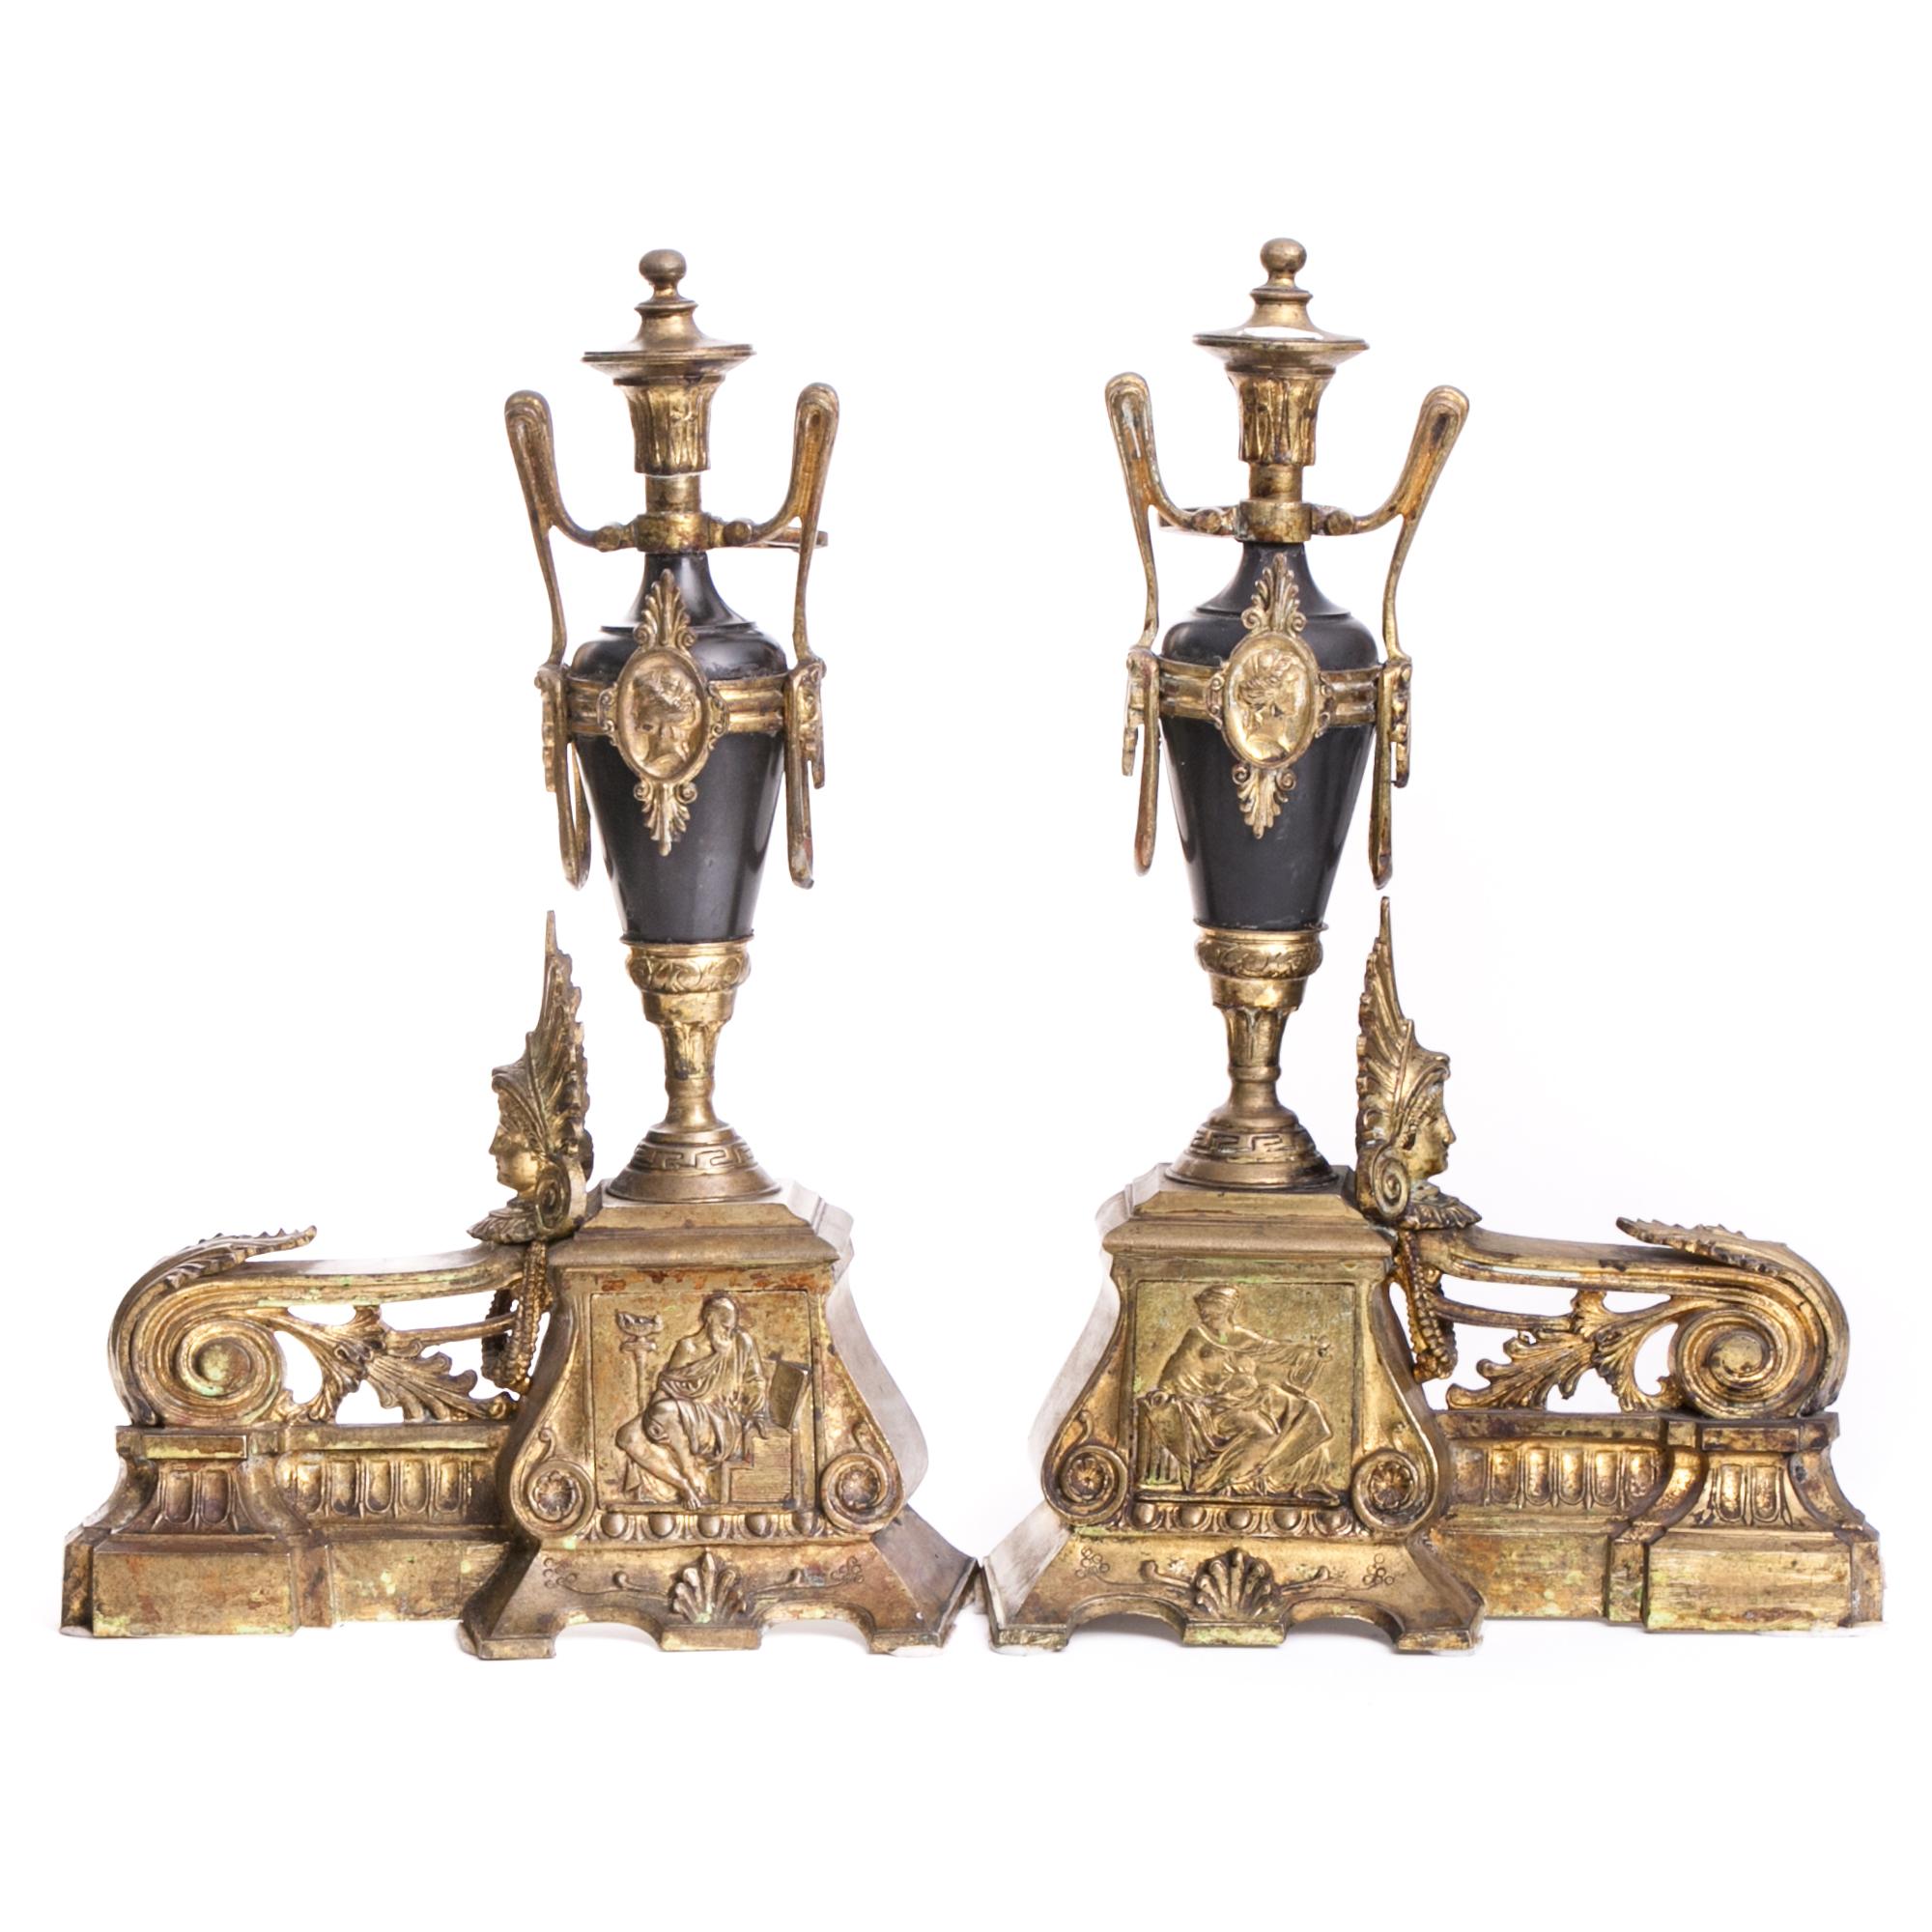 Fine example of Empire ormolu firedogs or andirons made of gilt bronze, in the so-called ormolu technique, from the 19th century. 

The bases are richly decorated with volute drifts, acanthus leaves motifs and palmetto shells, as well as relief